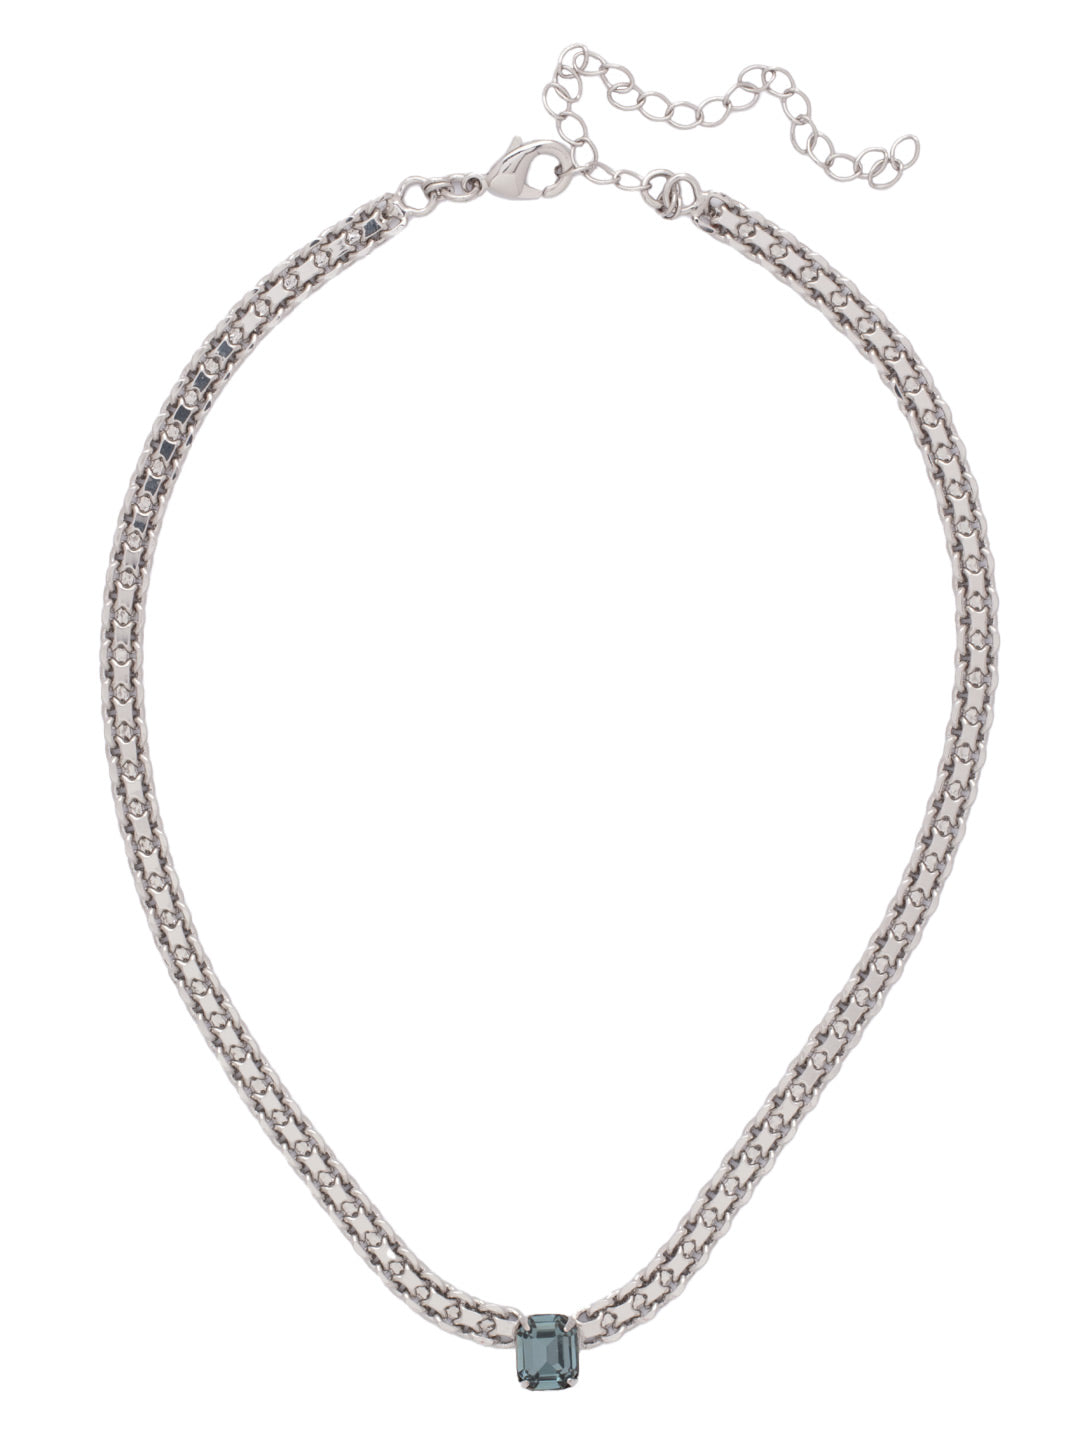 Octavia Tennis Necklace - NFK6PDASP - <p>The Octavia Tennis Necklace features a single petite emerald cut crystal on an adjustable chain, secured with a lobster claw clasp. From Sorrelli's Aspen SKY collection in our Palladium finish.</p>